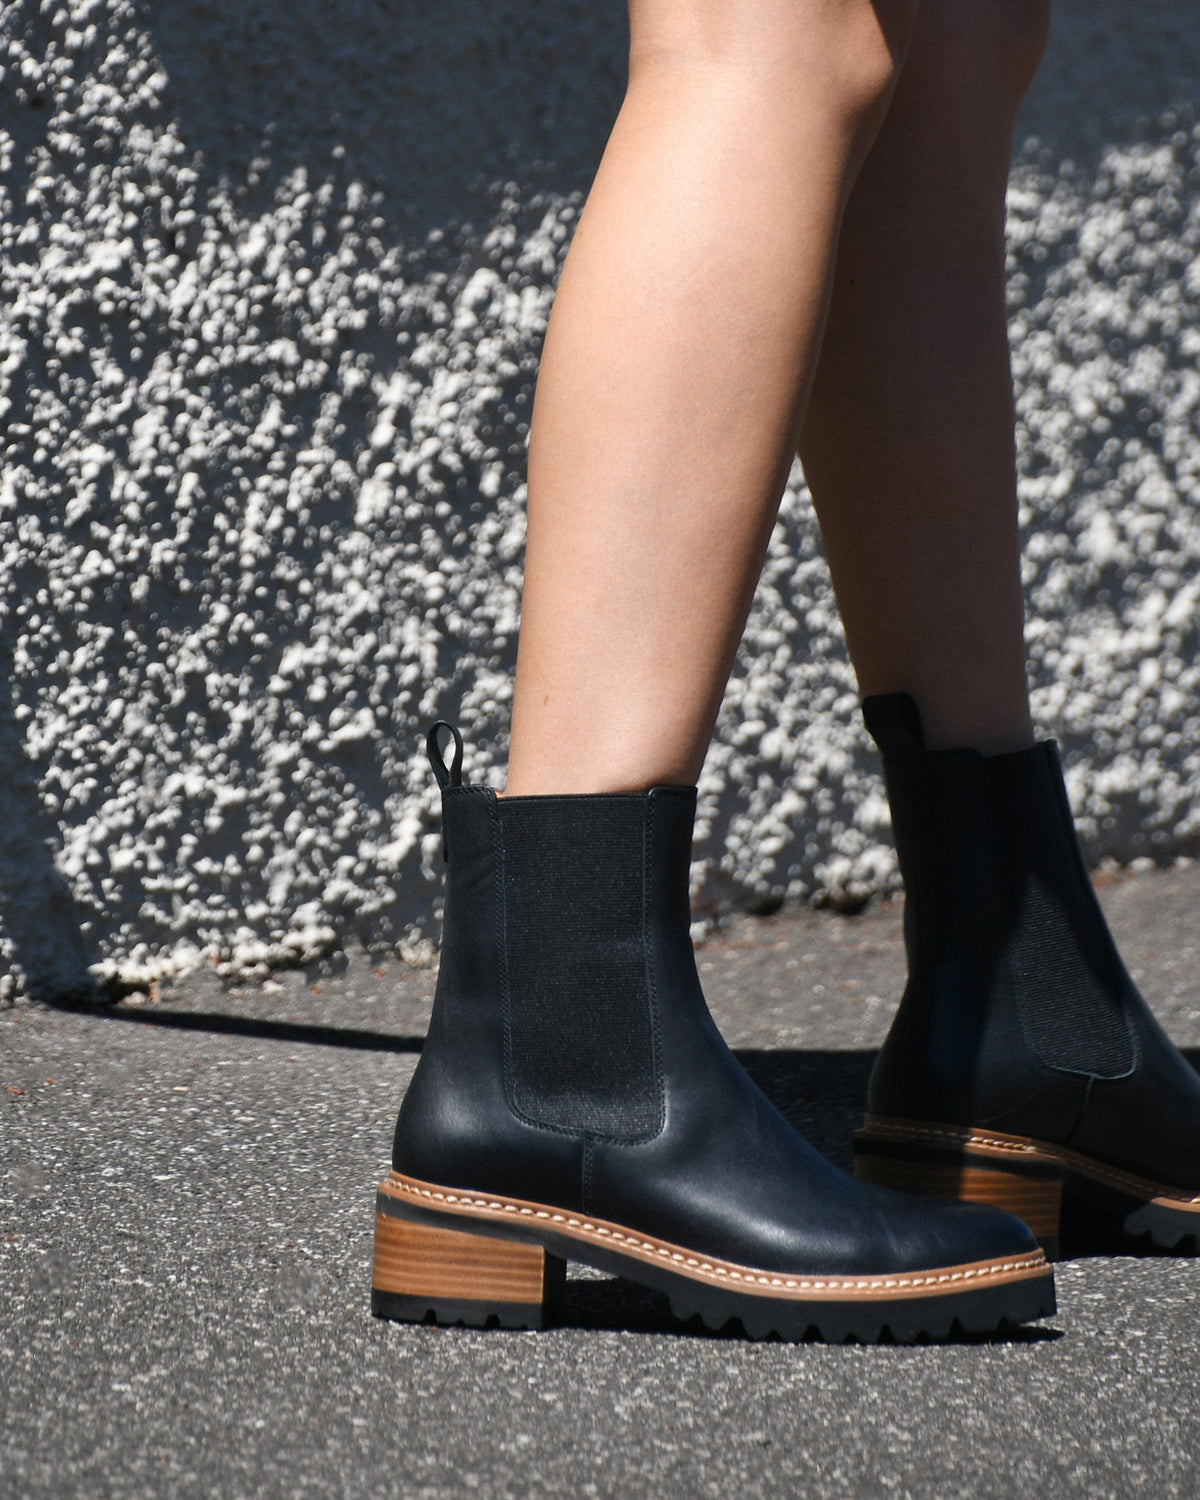 COMO FLAT ANKLE BOOTS BLACK LEATHER - Jo Mercer